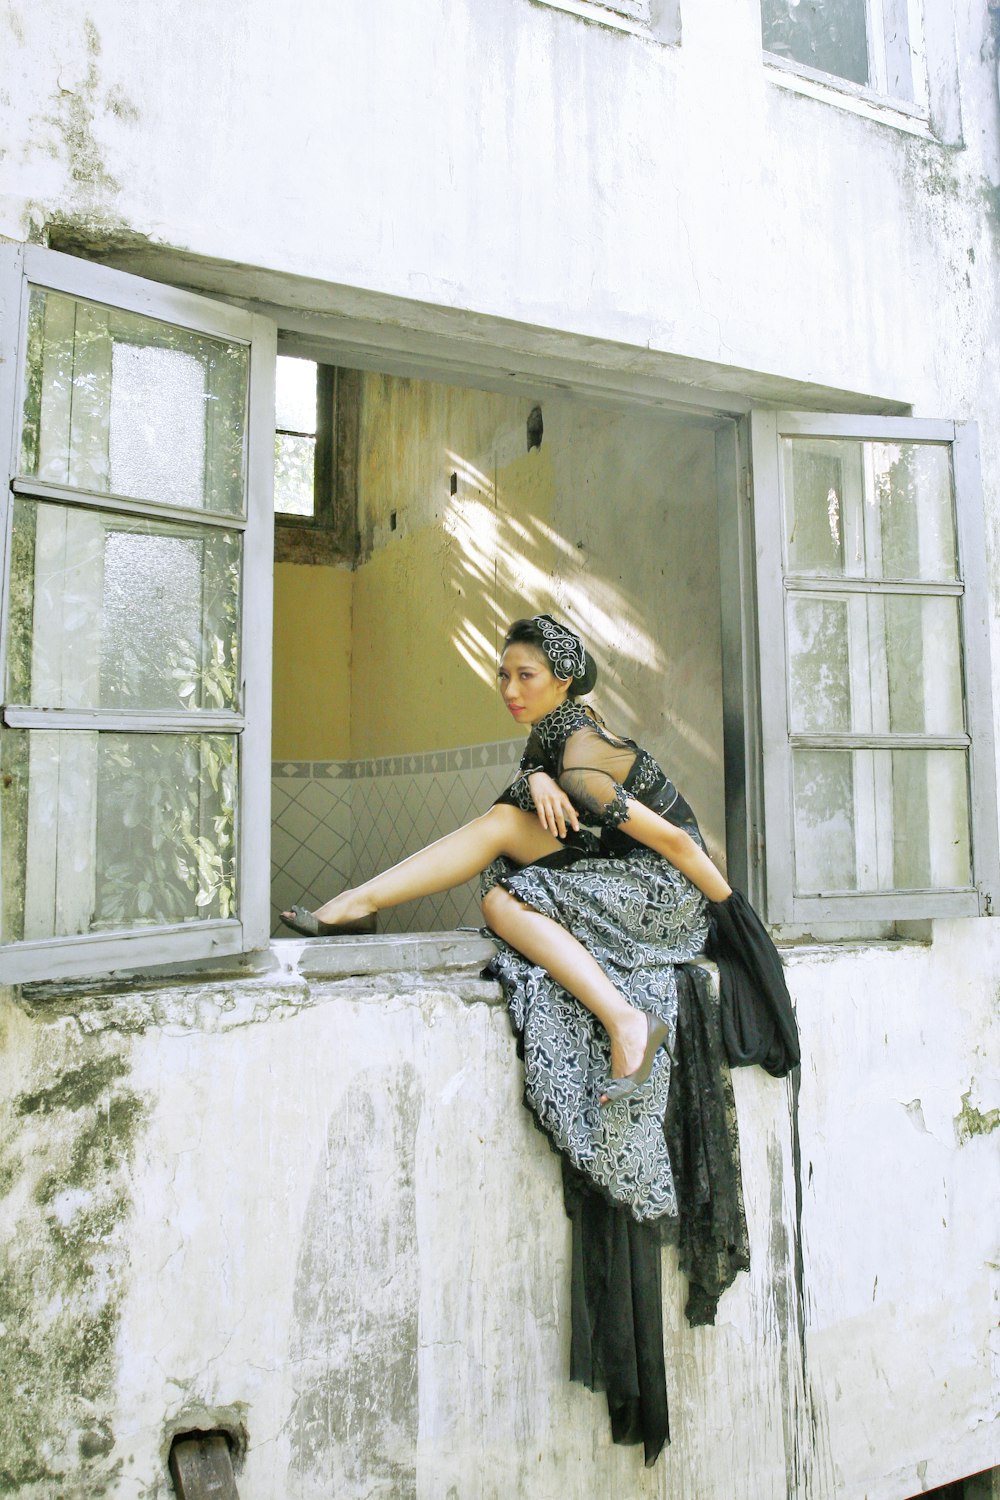 a woman sitting on a window sill next to a building